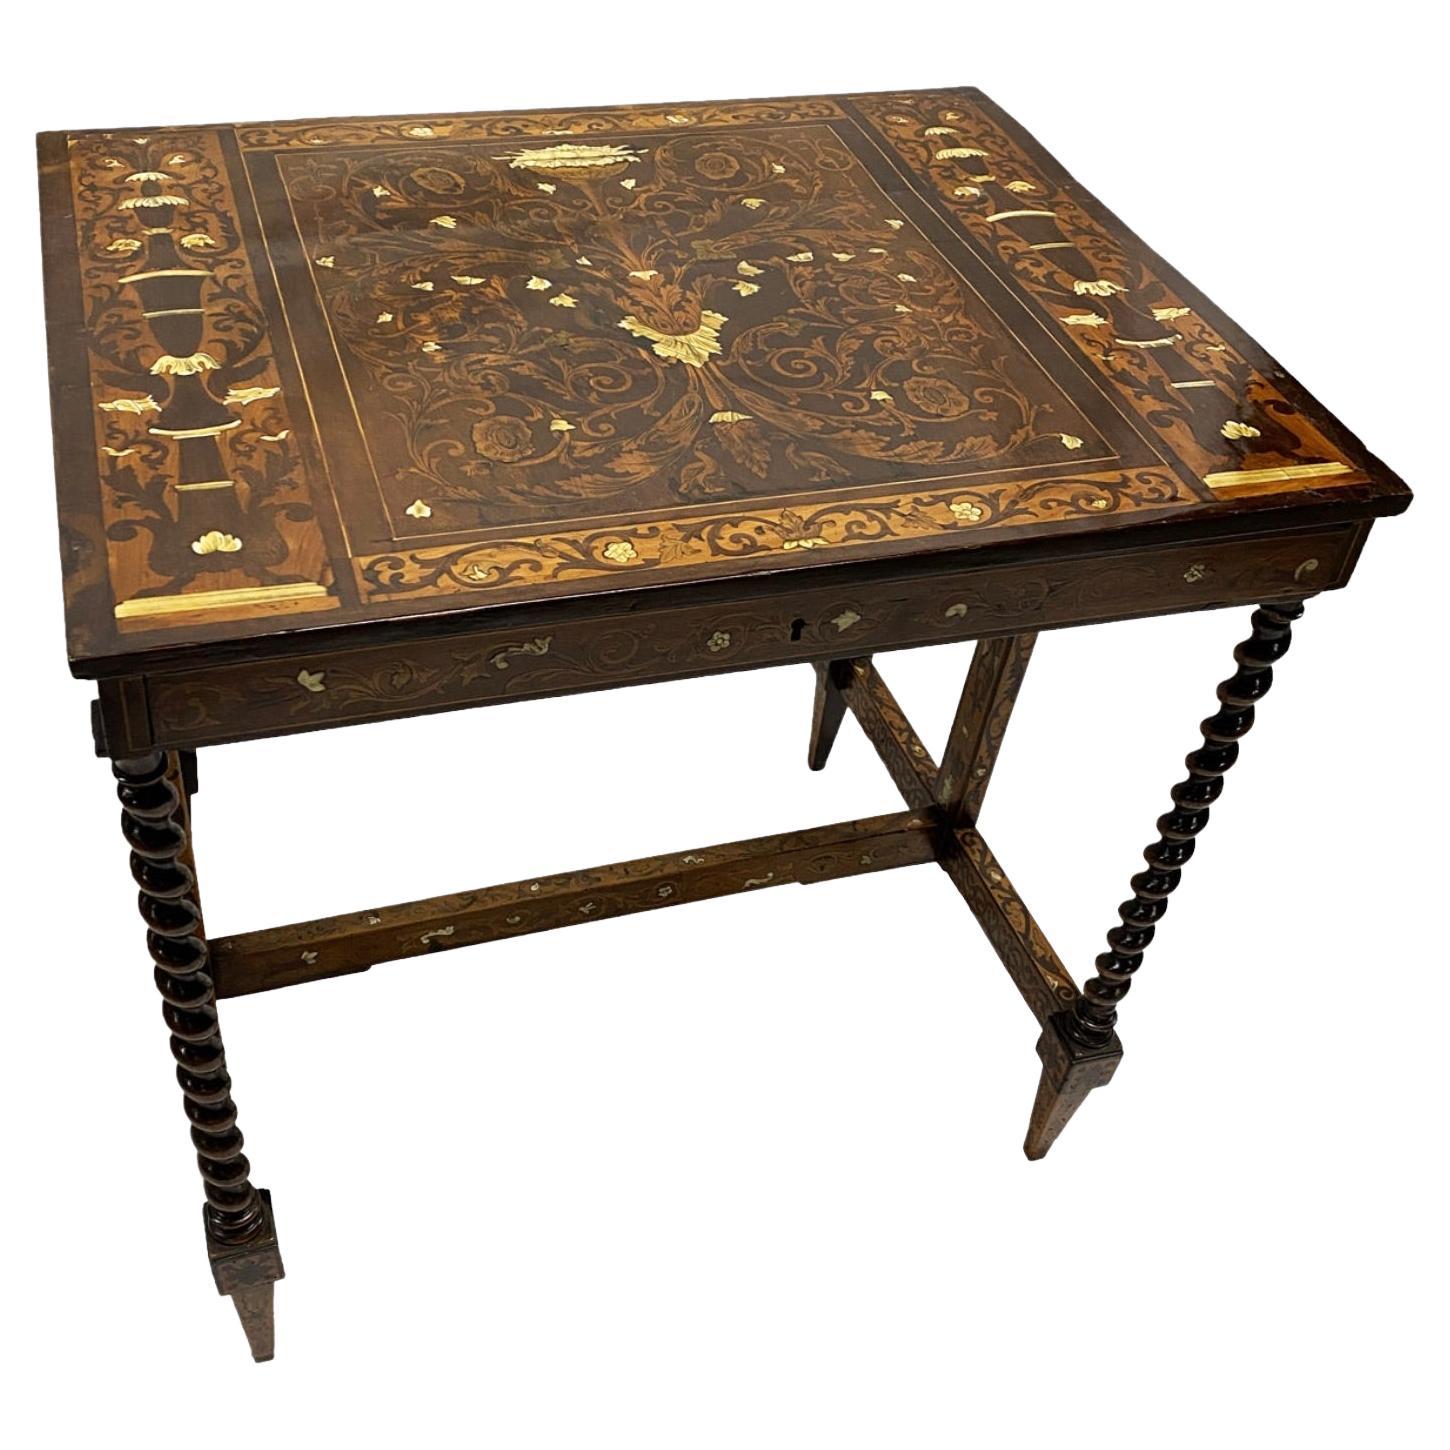 Ivory Inlaid Marquetry Table with Barley Twist Legs 